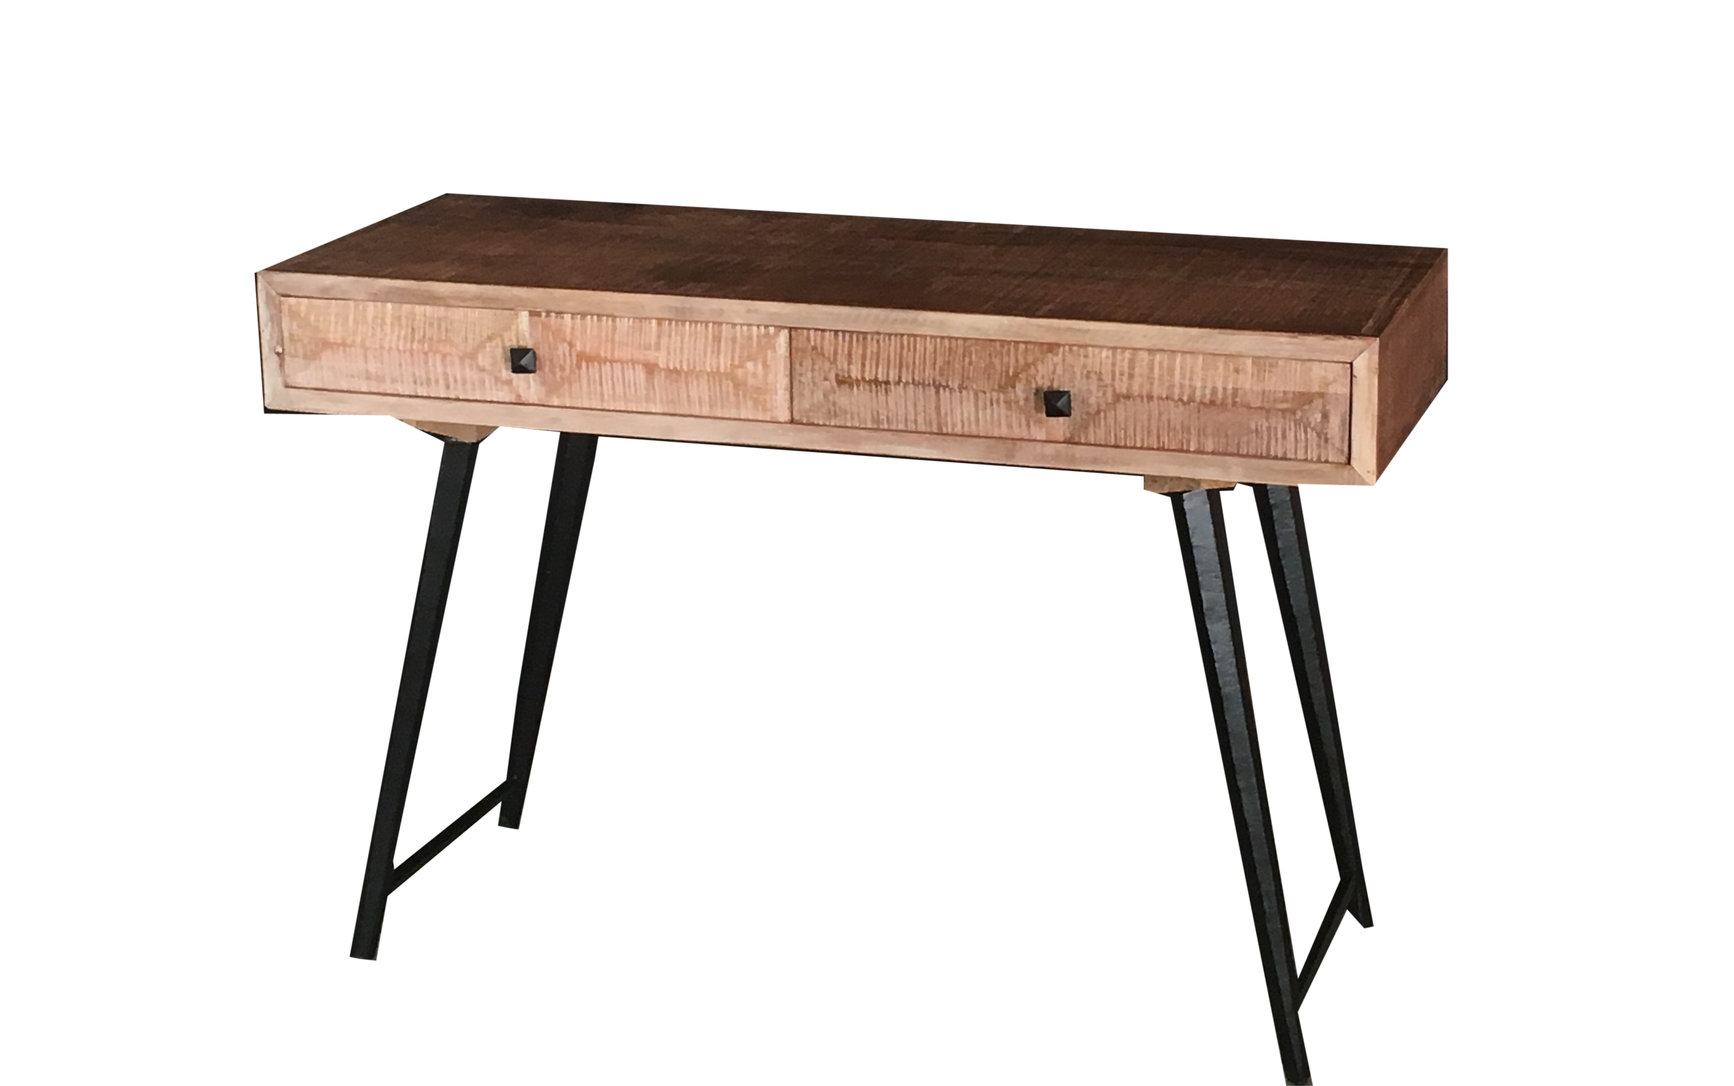 contemporary/ industrial style console table / desk